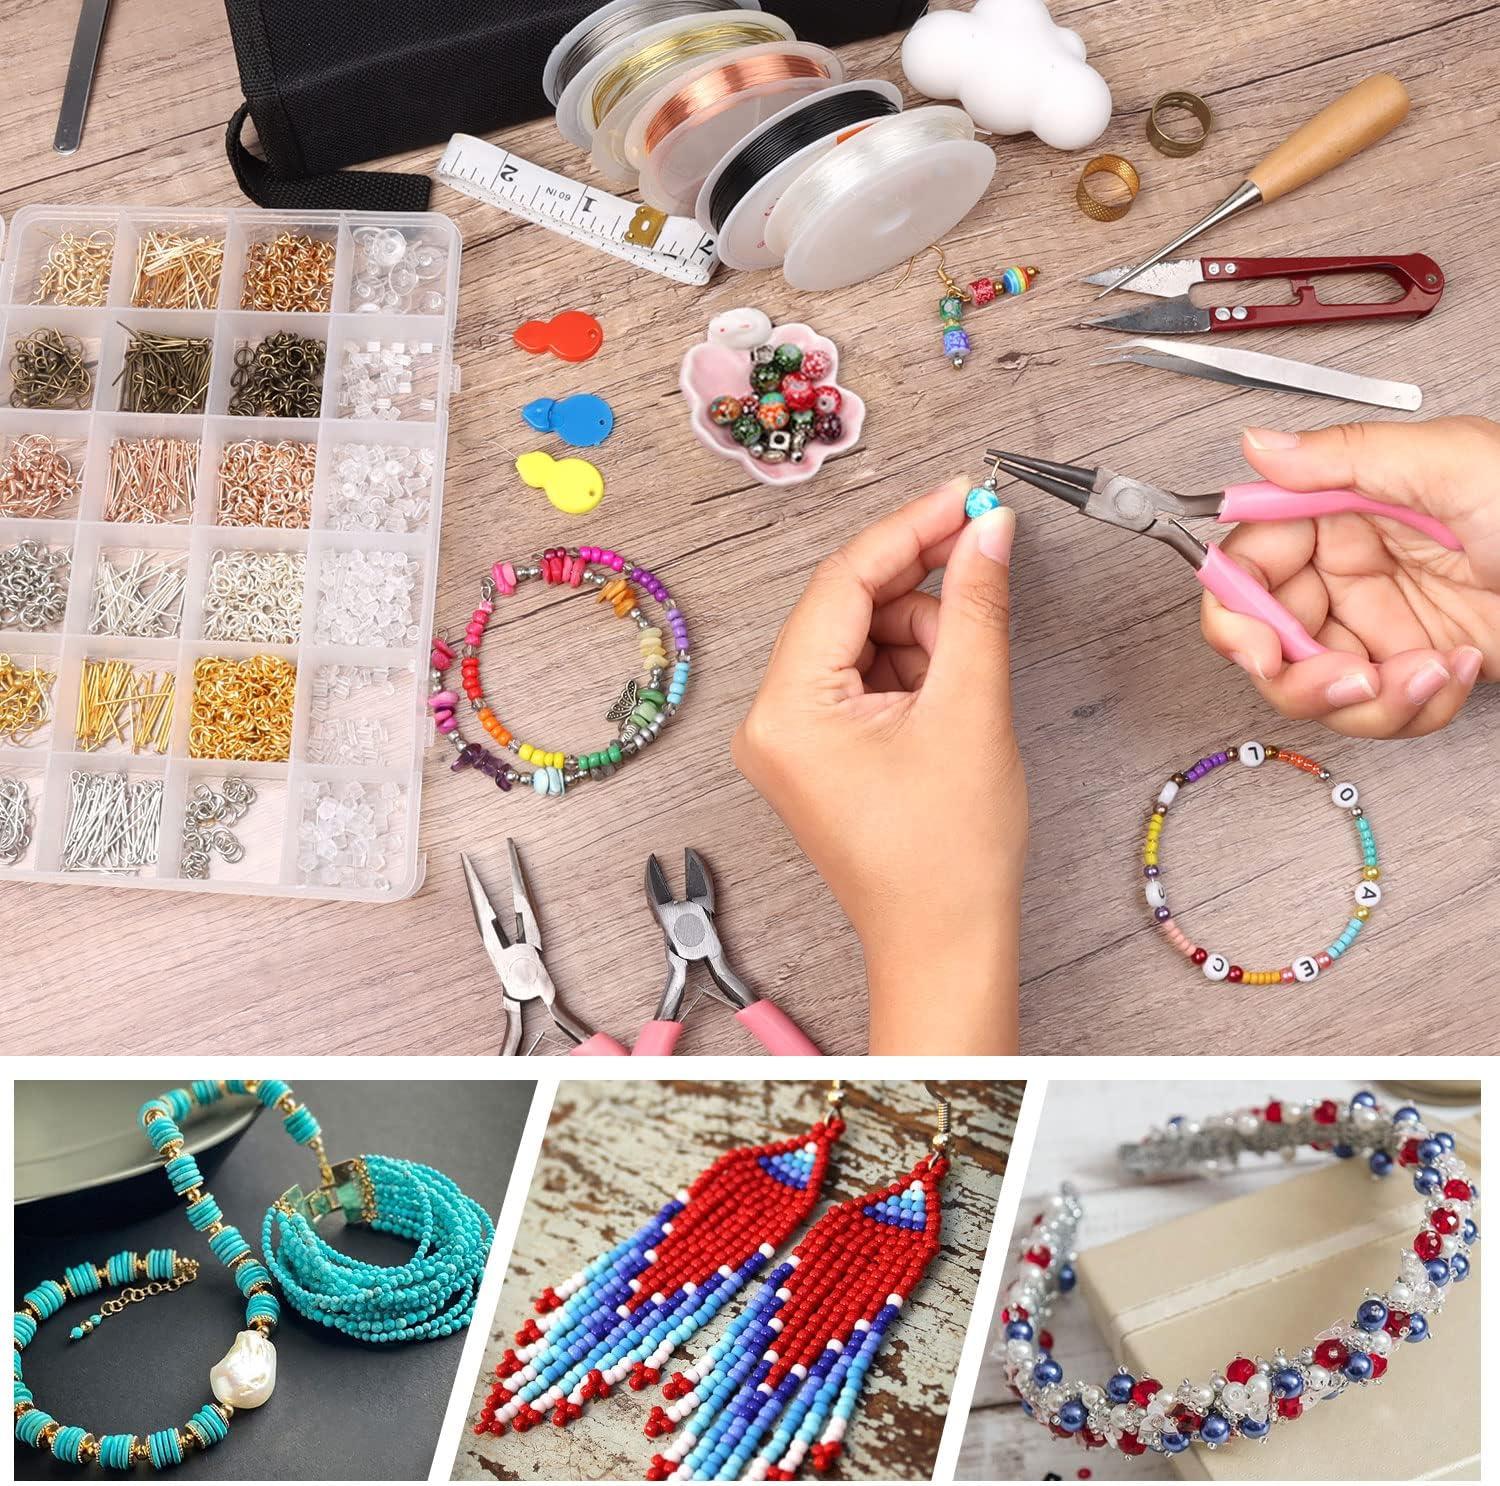 Beginners DIY Full Kit Jewelry Making Wire Wrapping Adult Craft